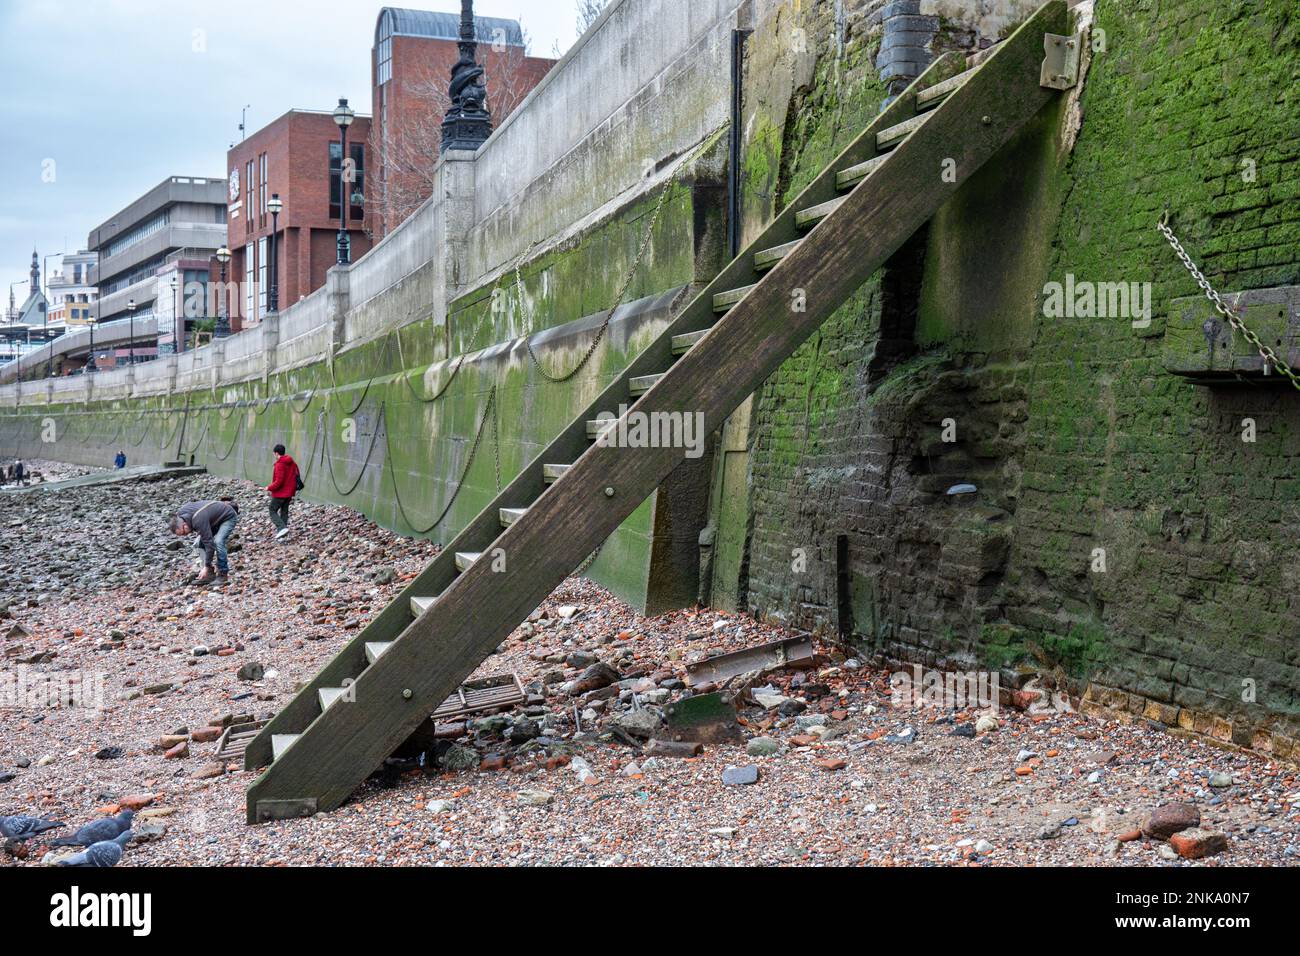 River Thames foreshore at low tide in North Bank of London, England Stock Photo